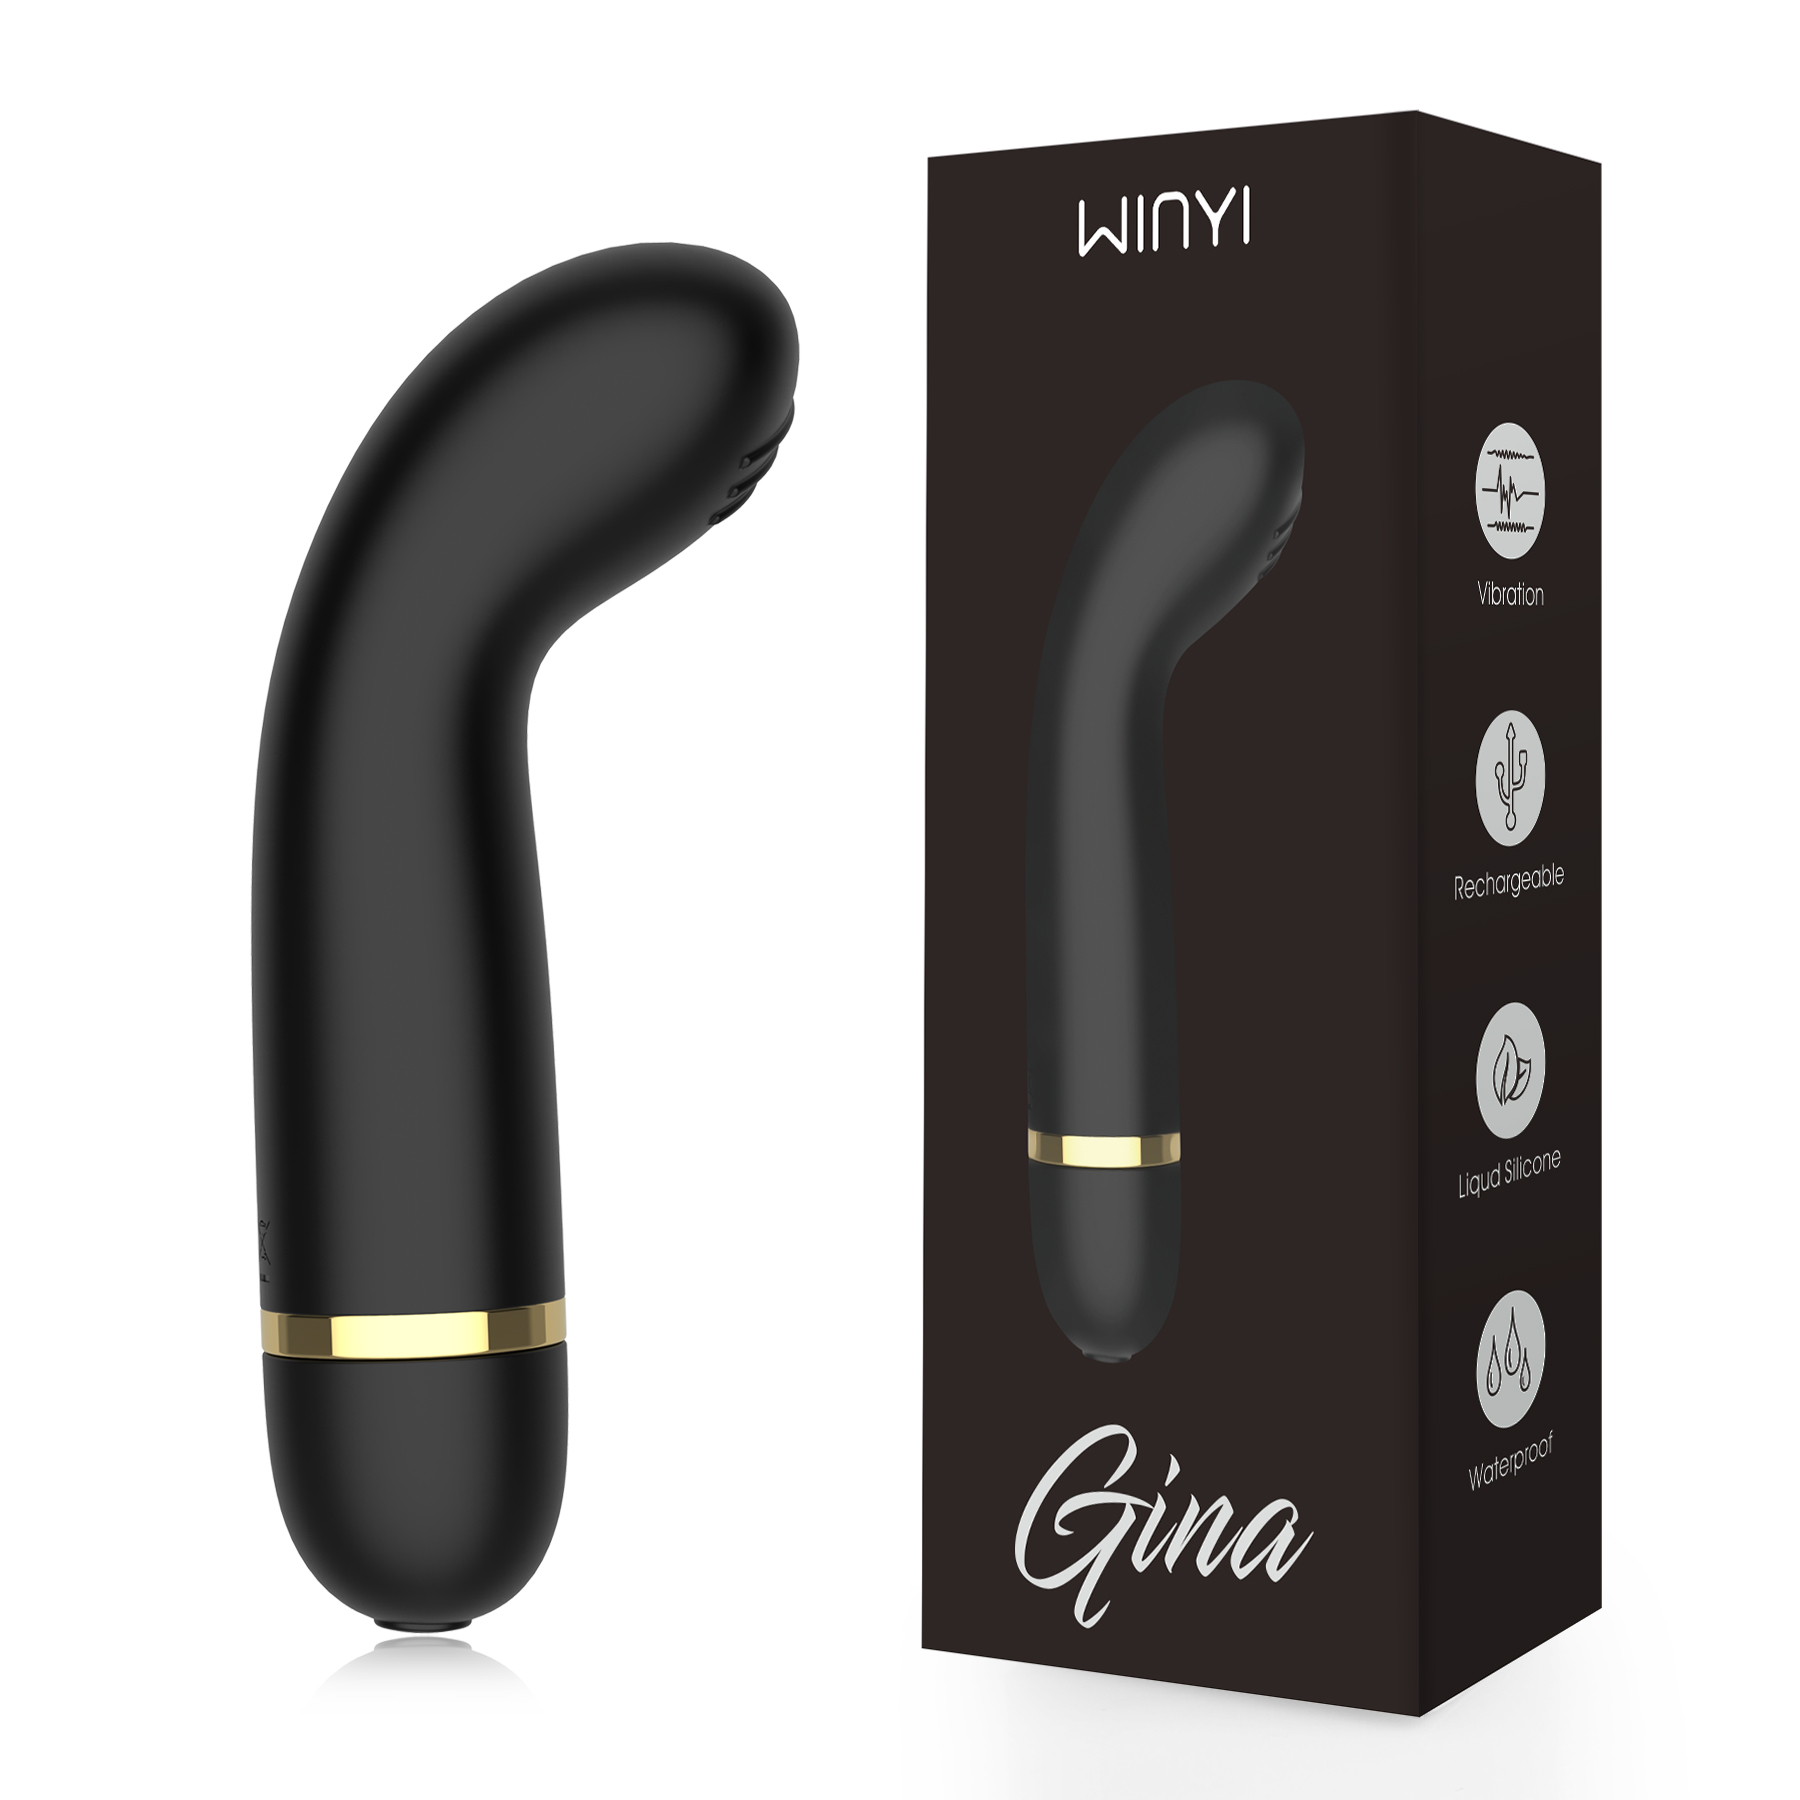 WY0582-BLA-sex toy packaging-bullet vibrator-Shipped to over 100+ countries-WINYI